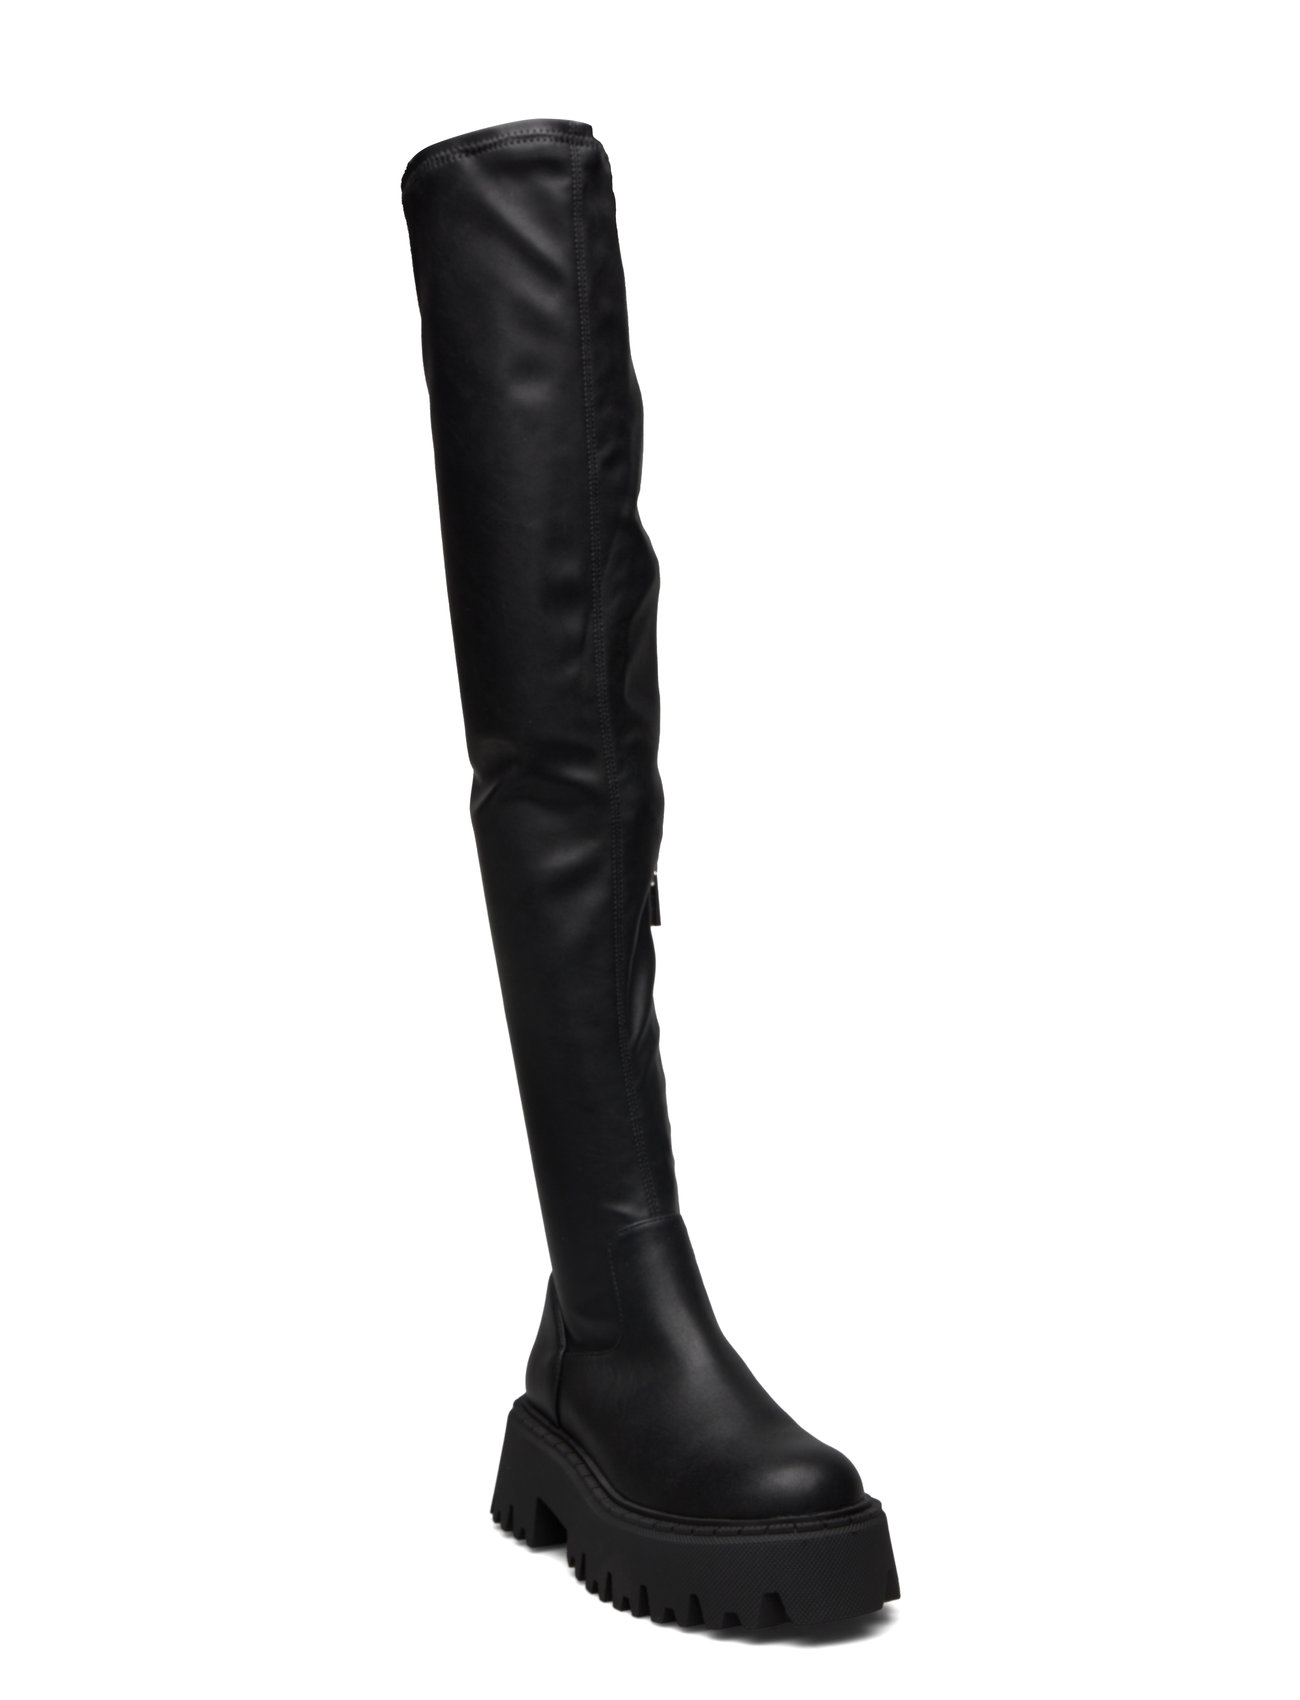 Outsource Boot Shoes Boots Over-the-knee Black Steve Madden